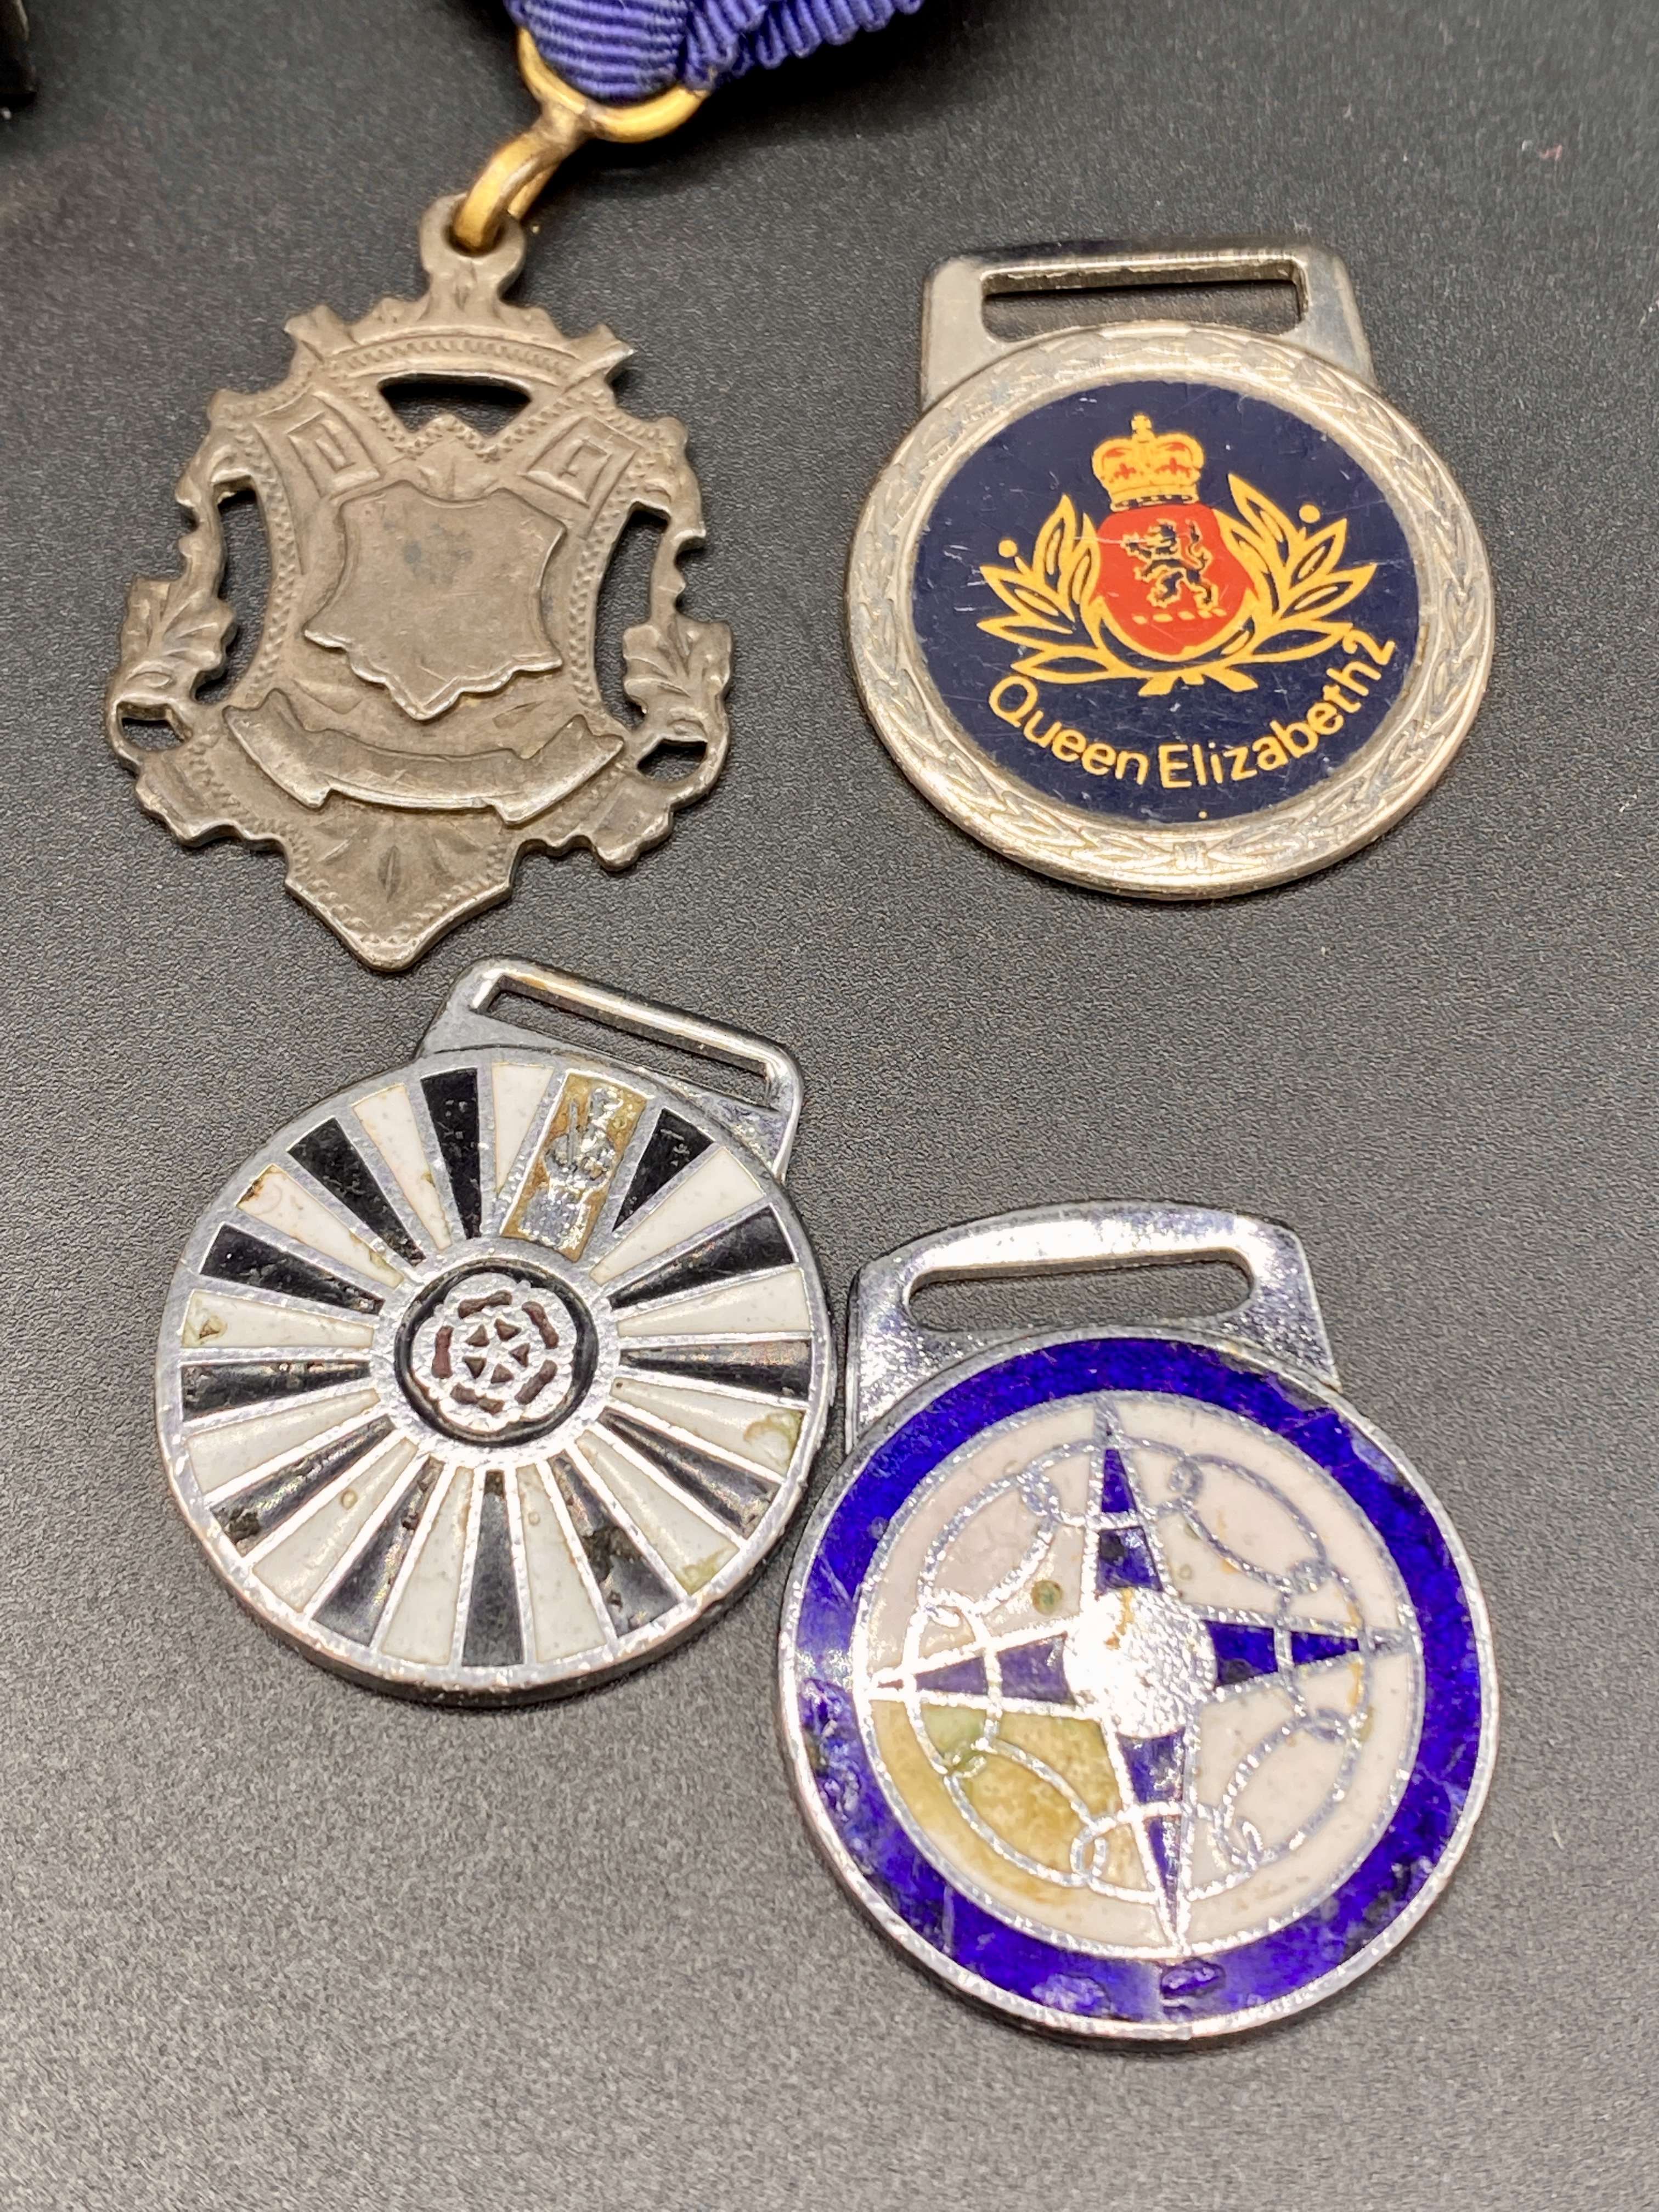 WW1 War Badge for "Services Rendered" complete with issue note; WW2 Defence Medal, and others - Image 7 of 11